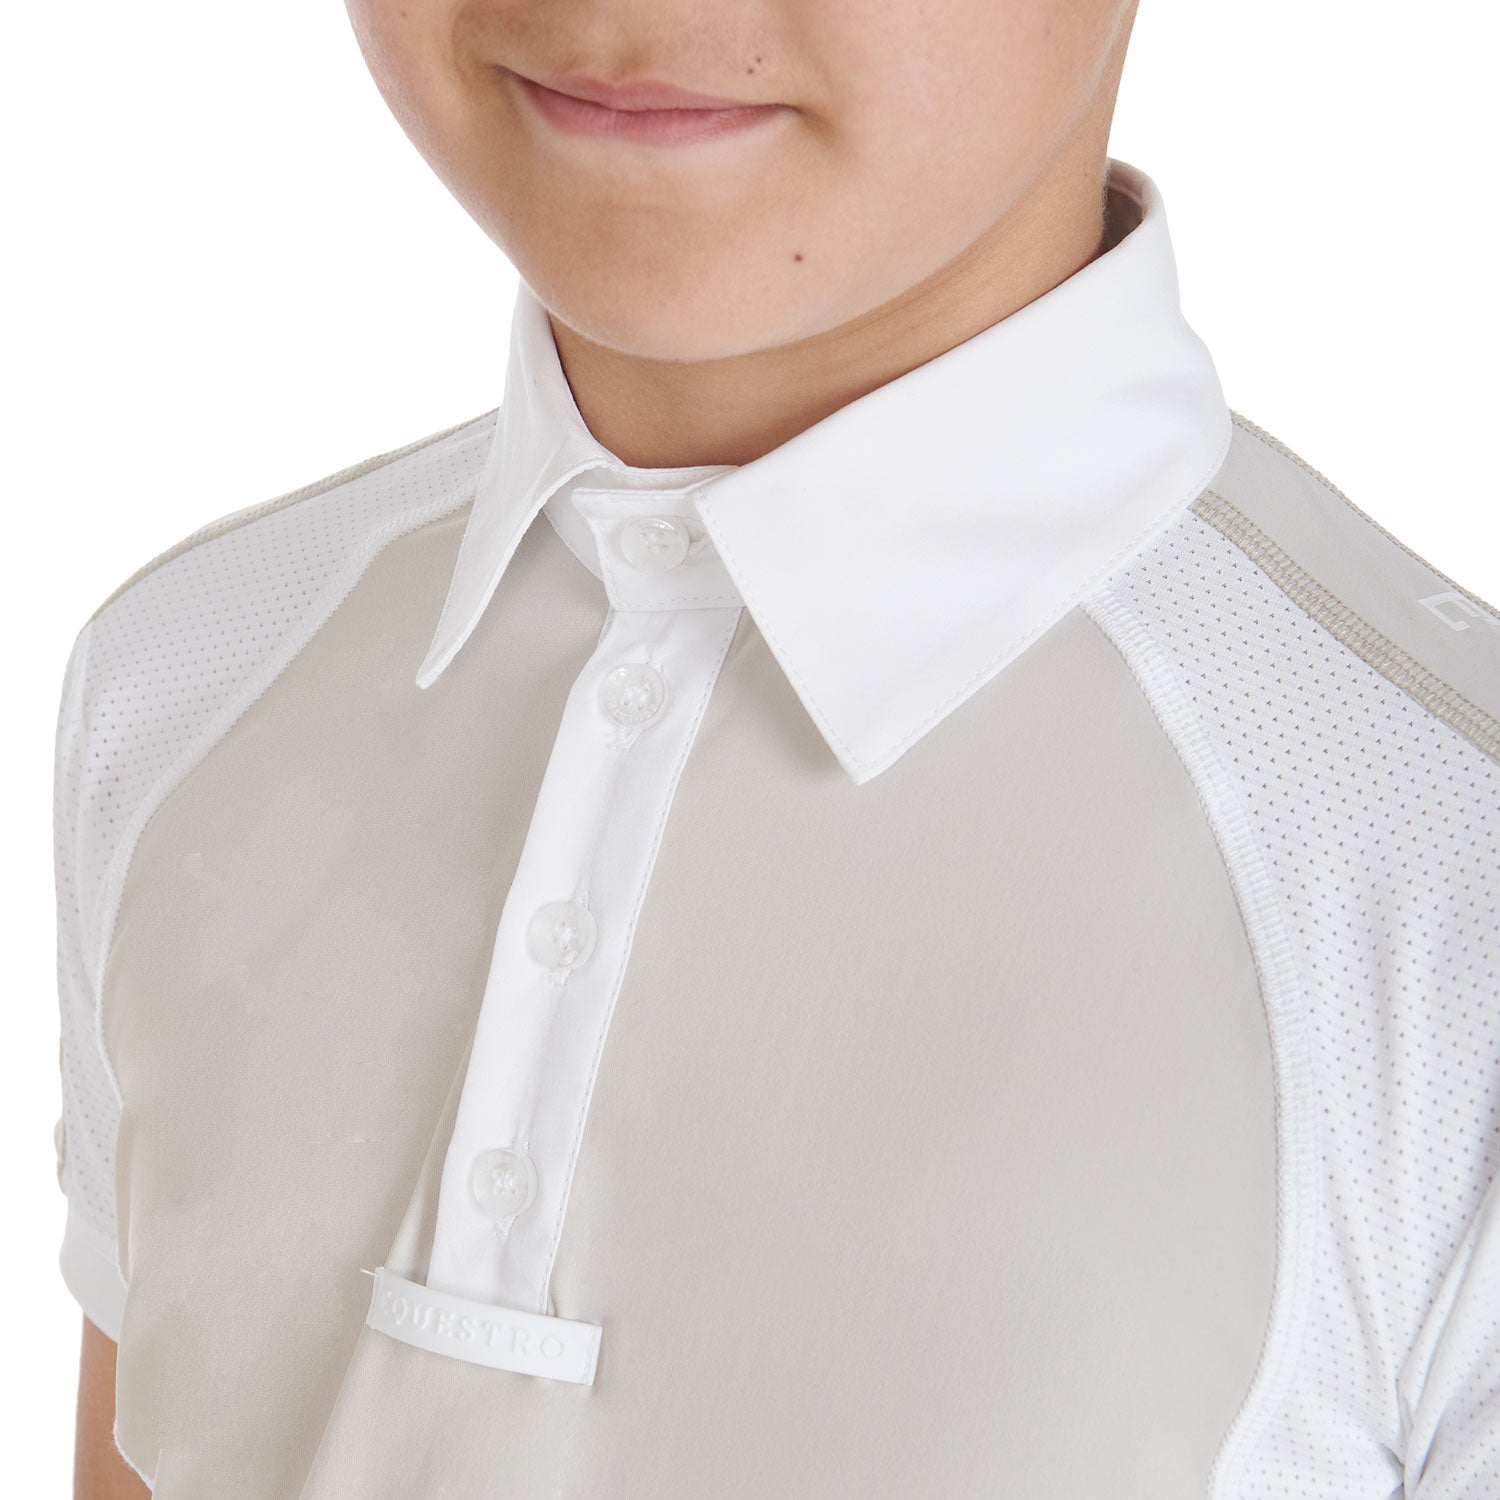 Boys competition clothing for horse riding